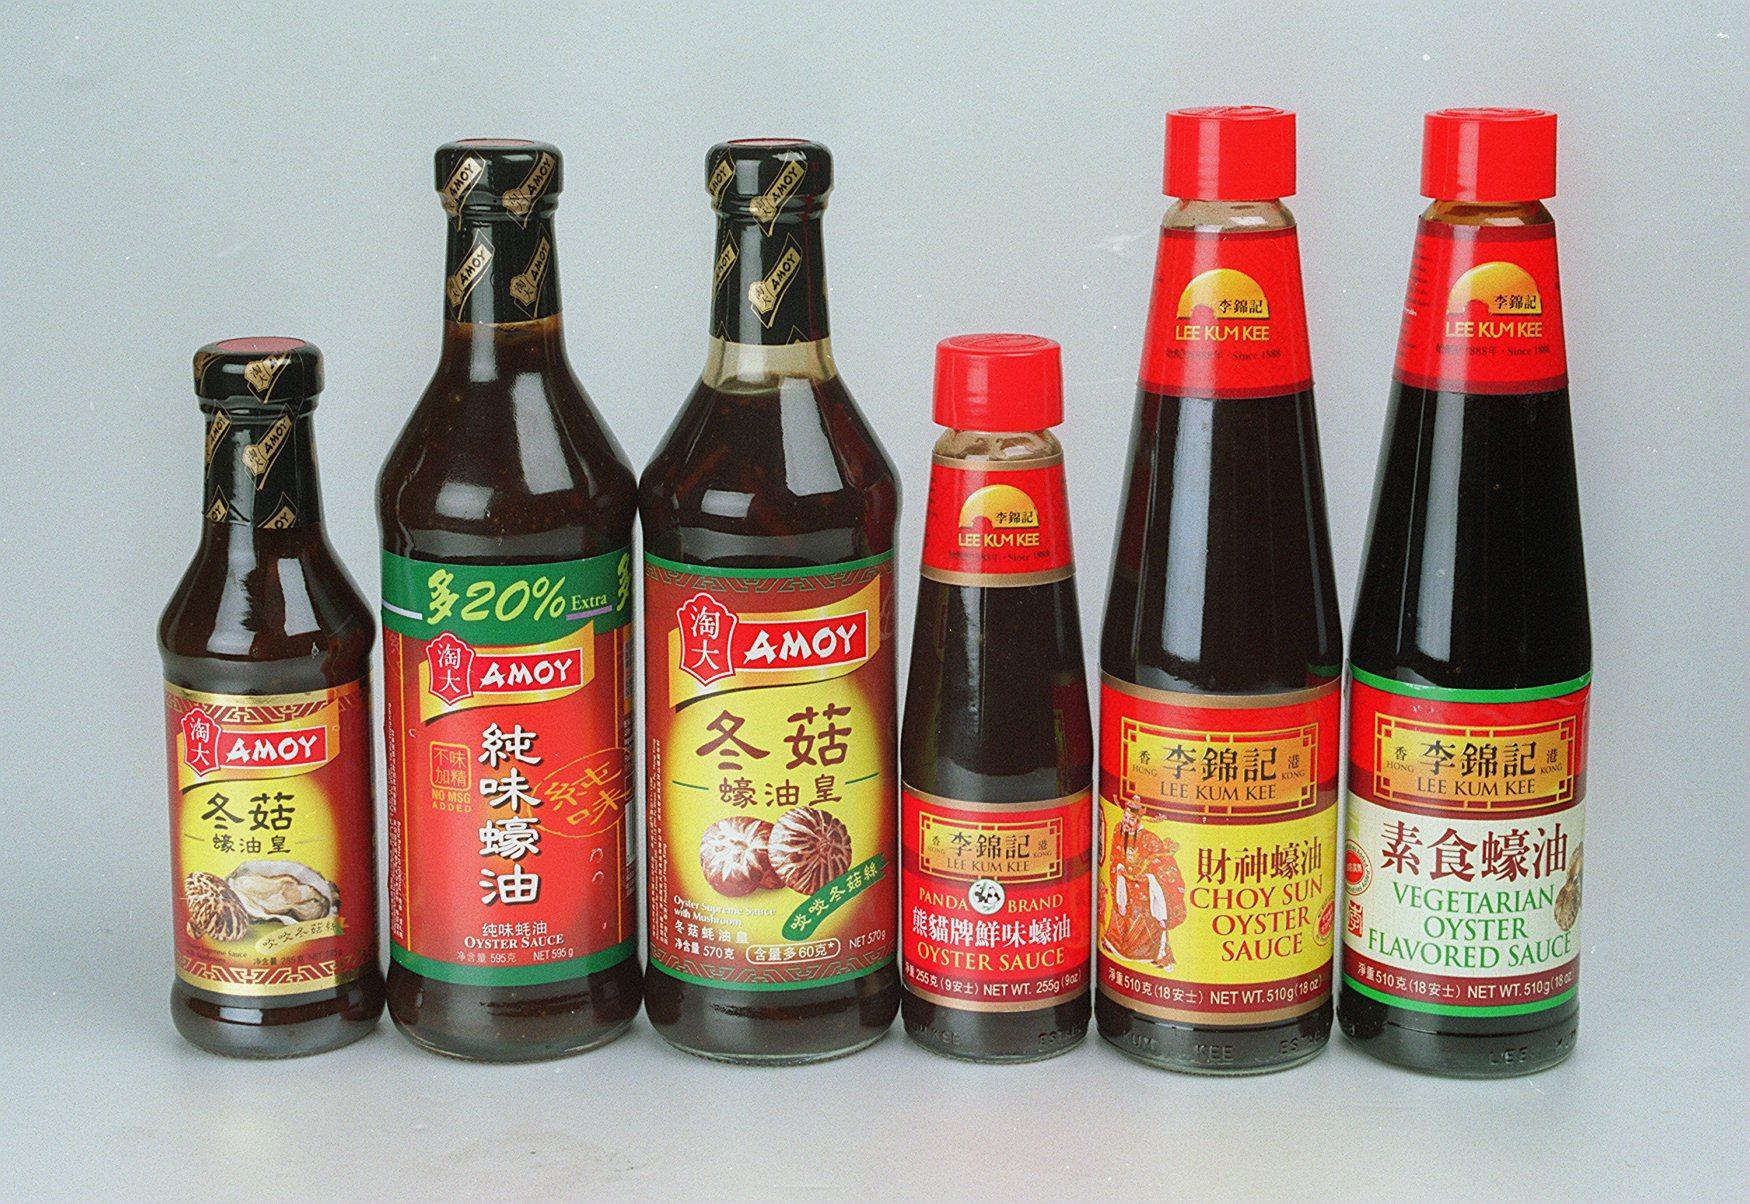 Amoy and Lee Kum Kee oyster sauces. The secret to cooking great Chinese food is the ready-made condiments, Andrew Sun writes.